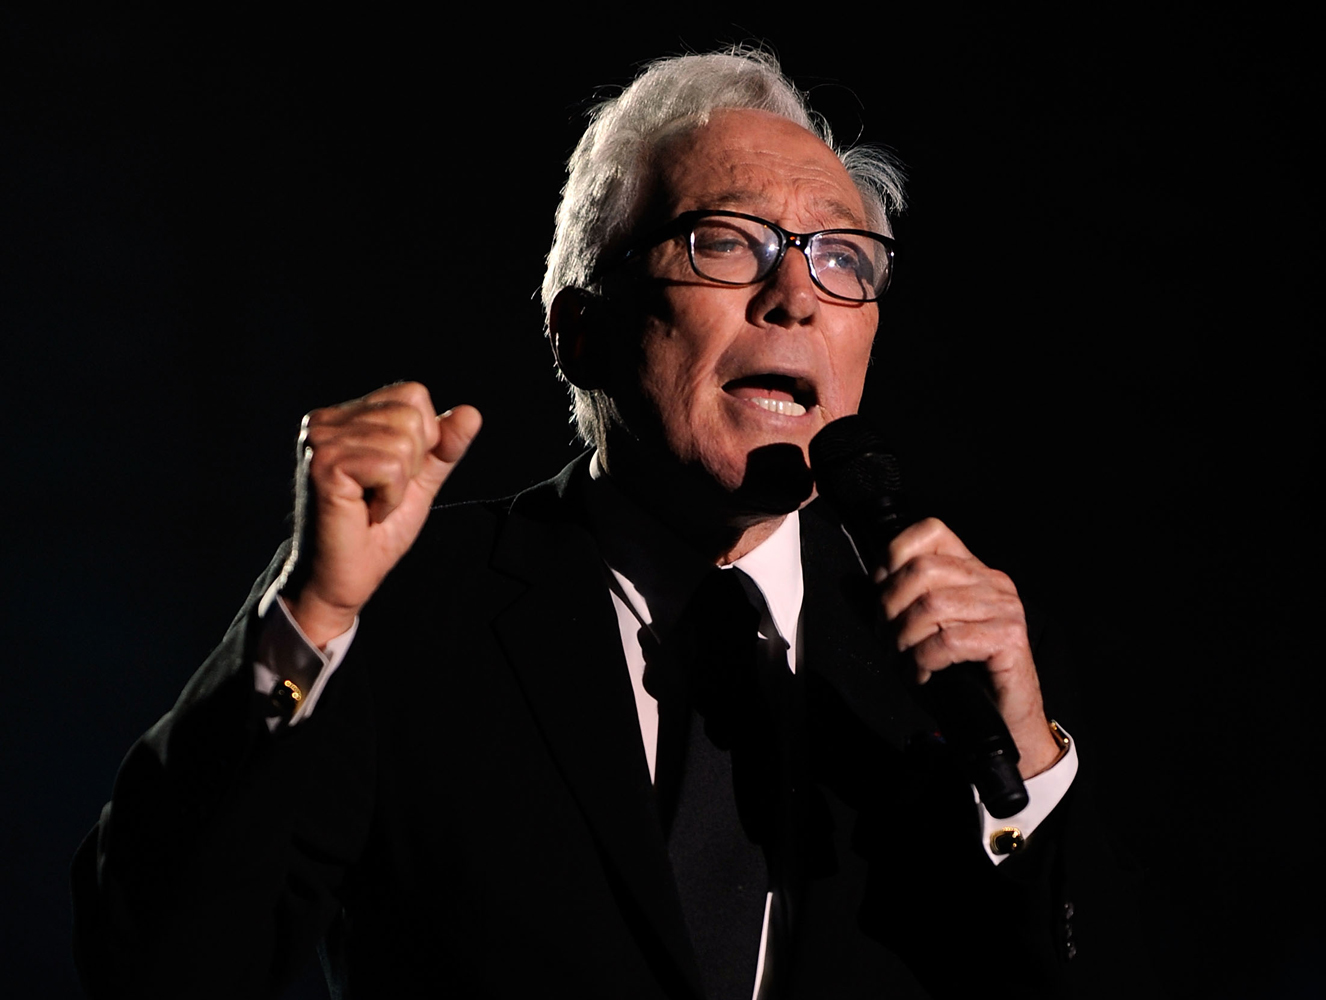 Singer Andy Williams dies at 84 after battle with cancer